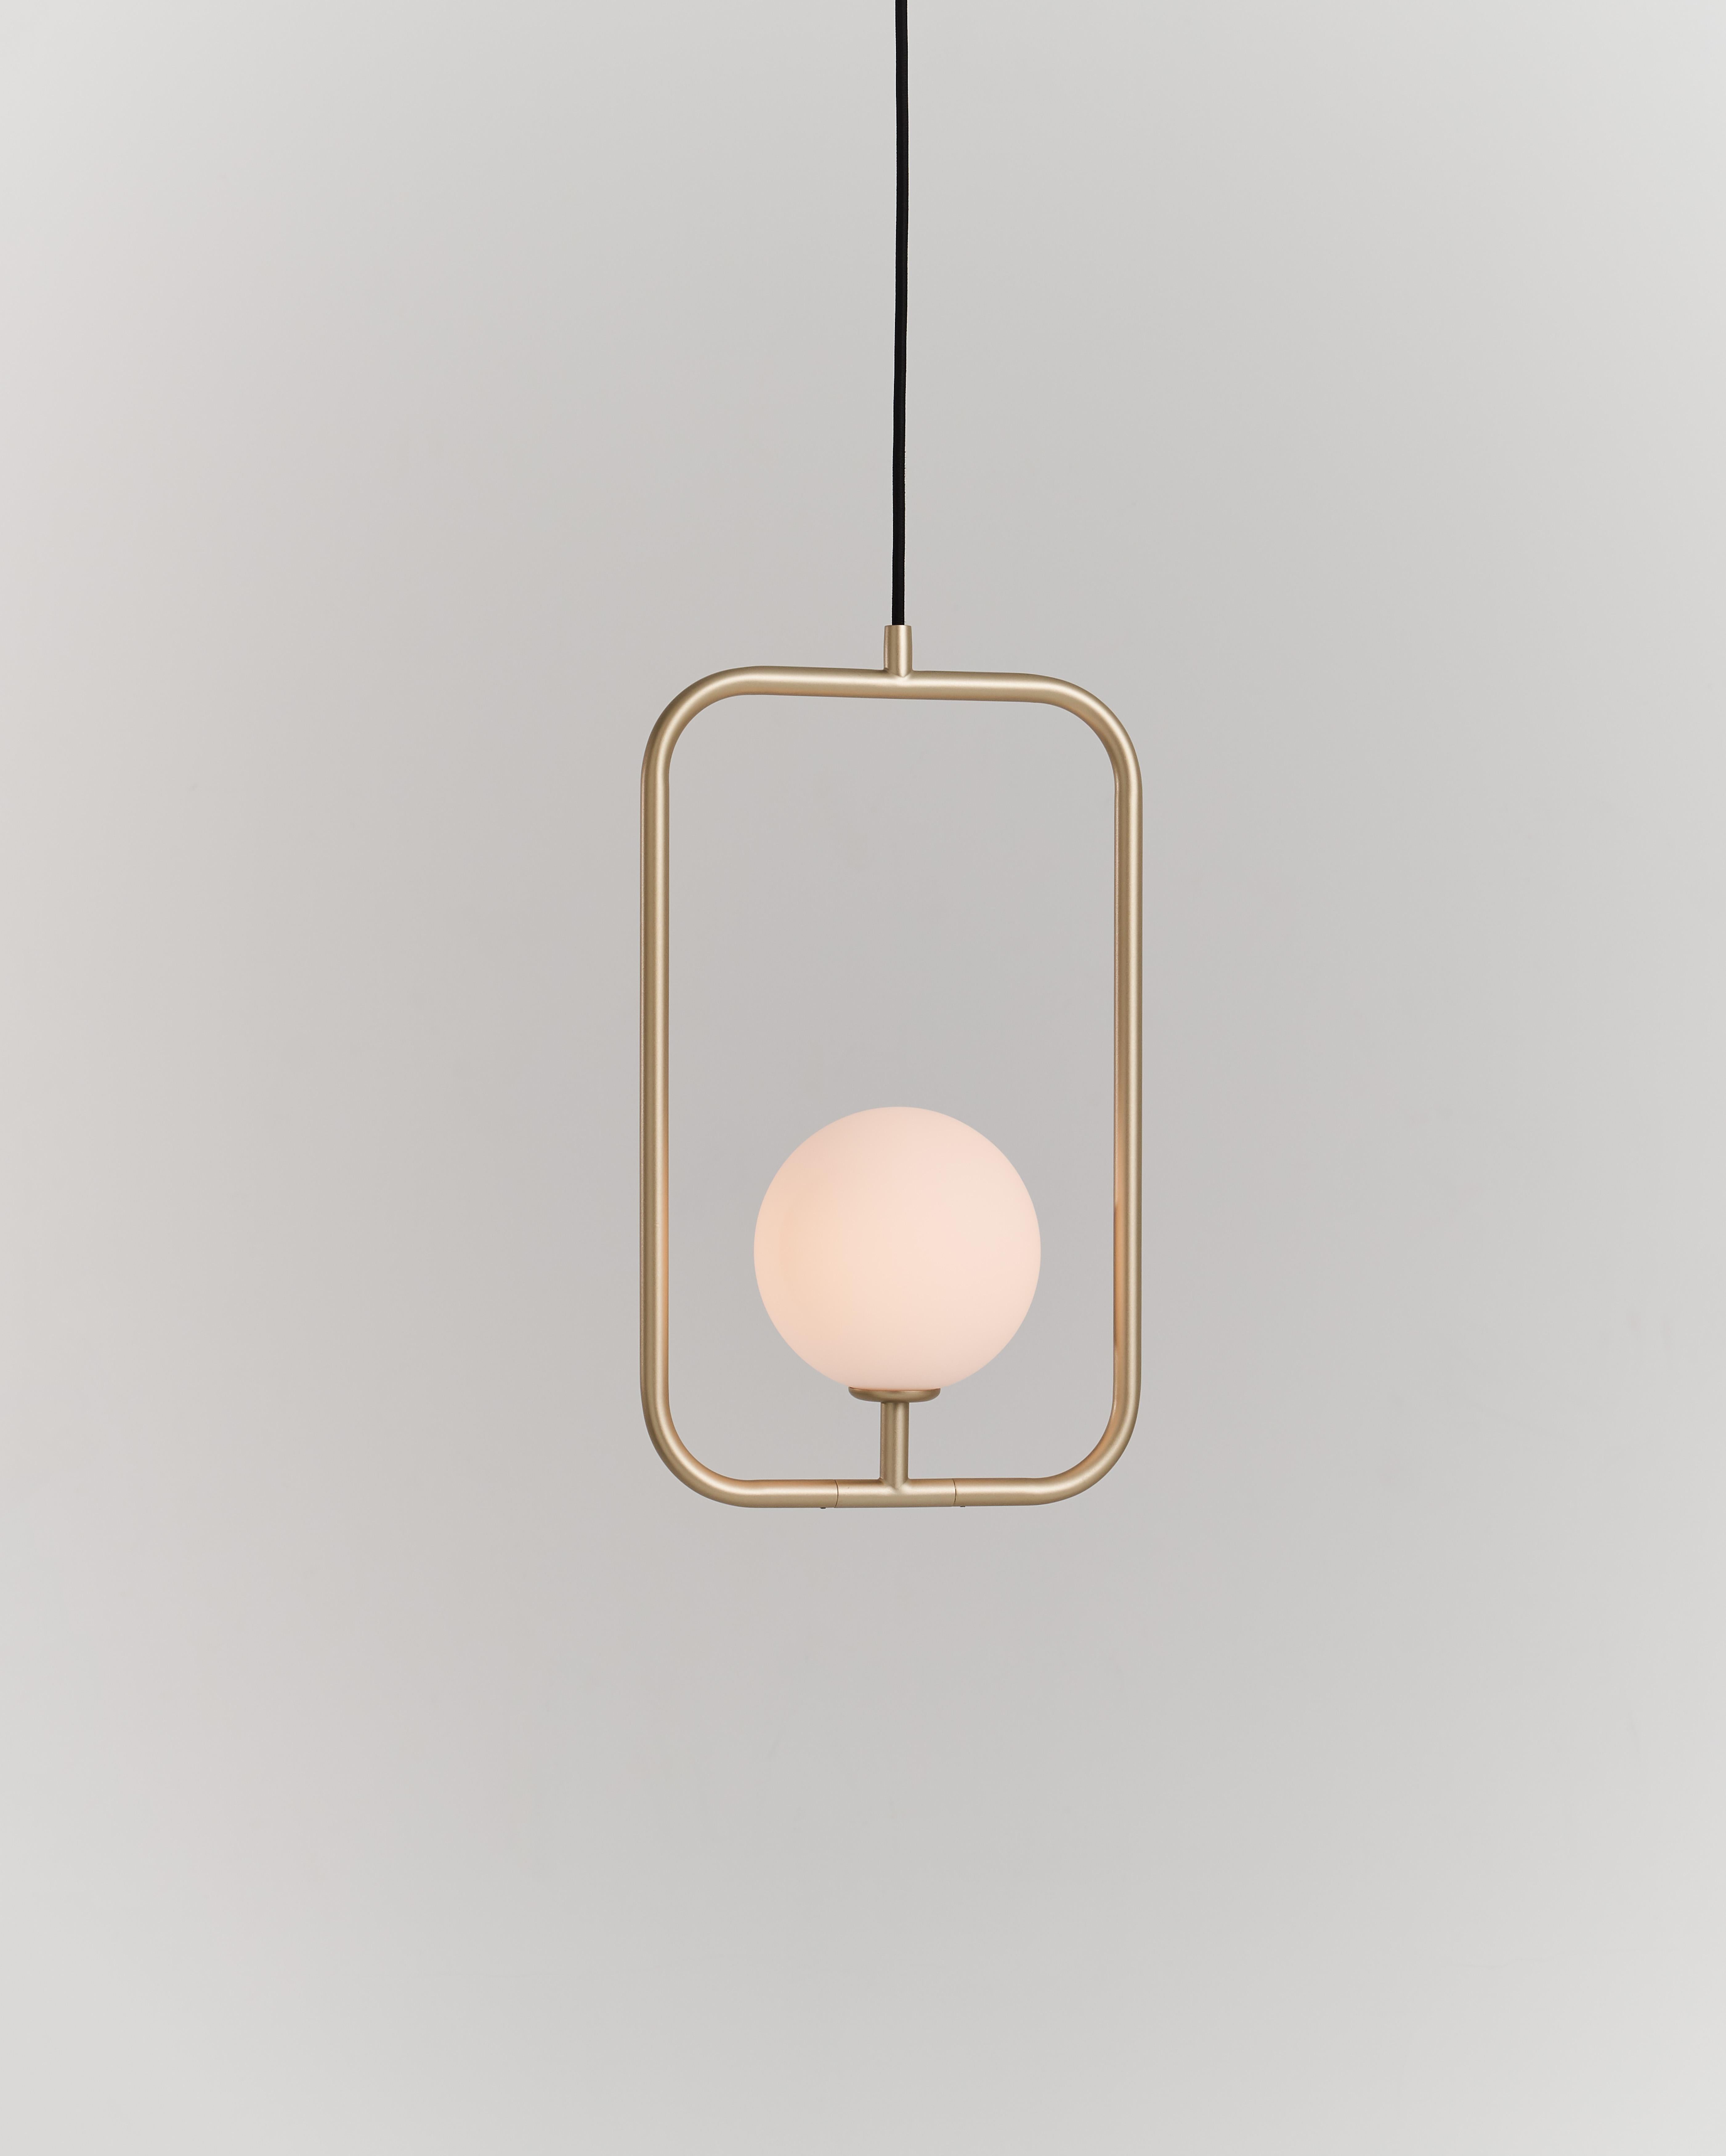 Sircle Pendant L, a symbolization merged Square and Circle, inspired by the East aesthetic philosophy, the circular light ball just like a soft tender mind leans on the rigid prudent frame, chemically shaped a harmonious feature with its flexible